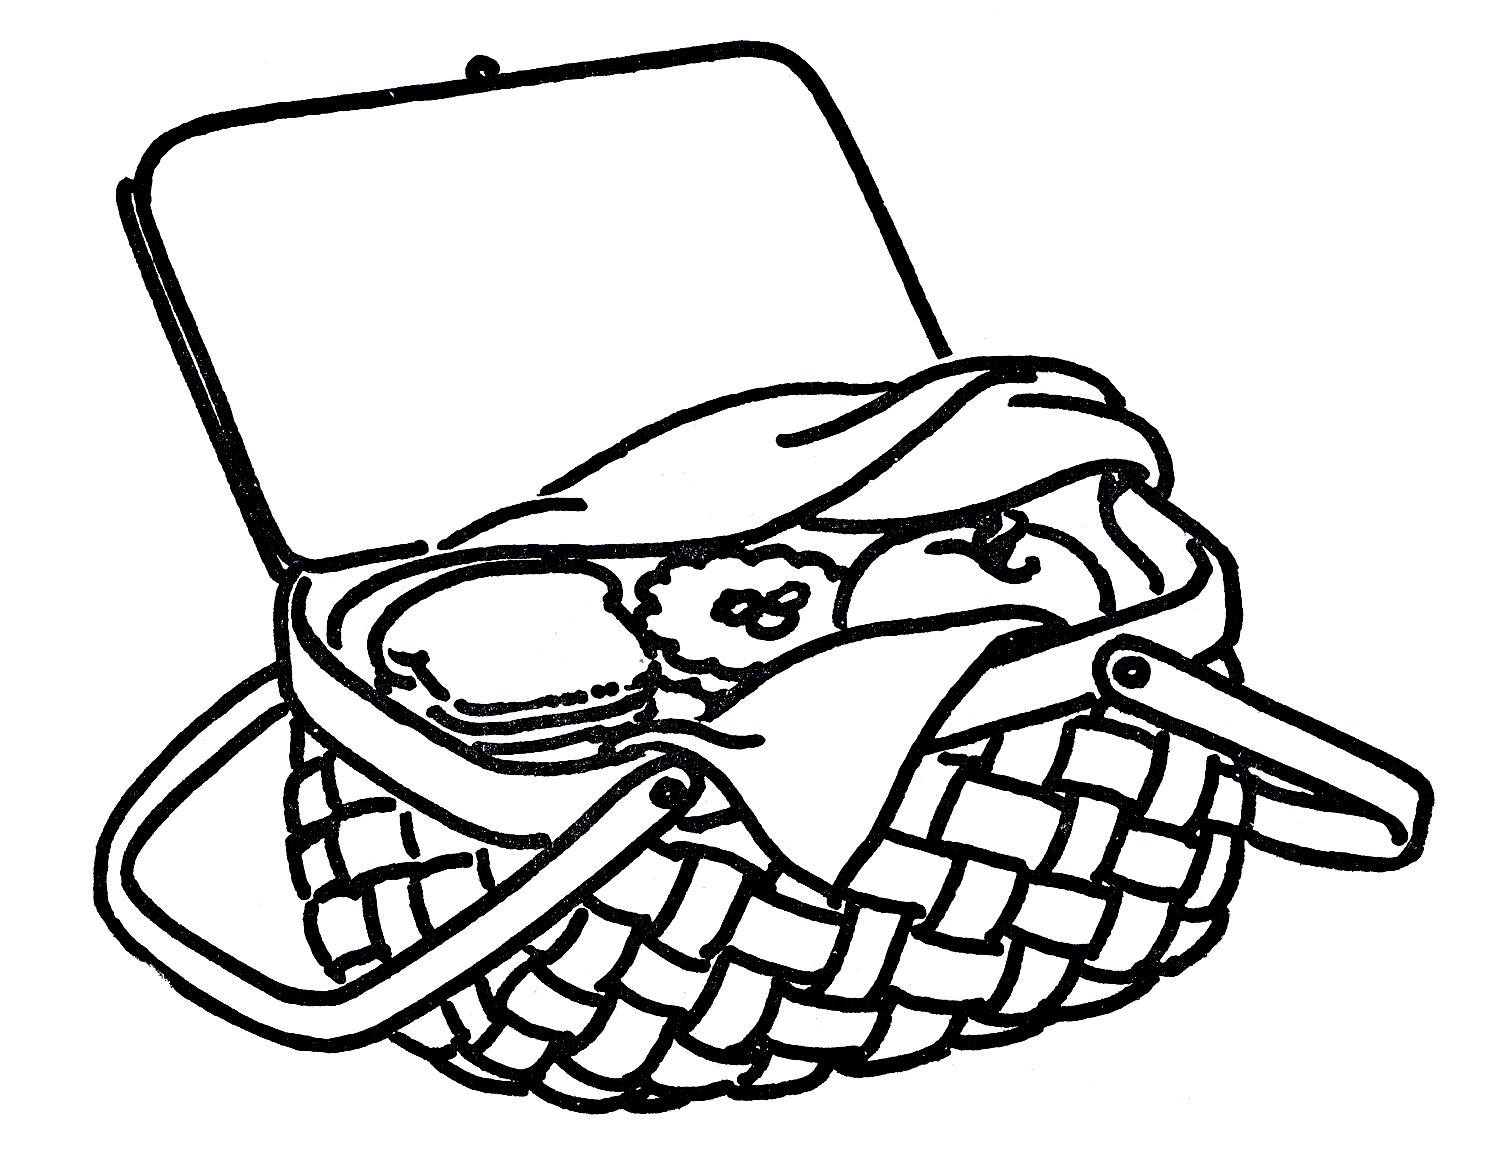 Images Of Picnic Baskets - ClipArt Best